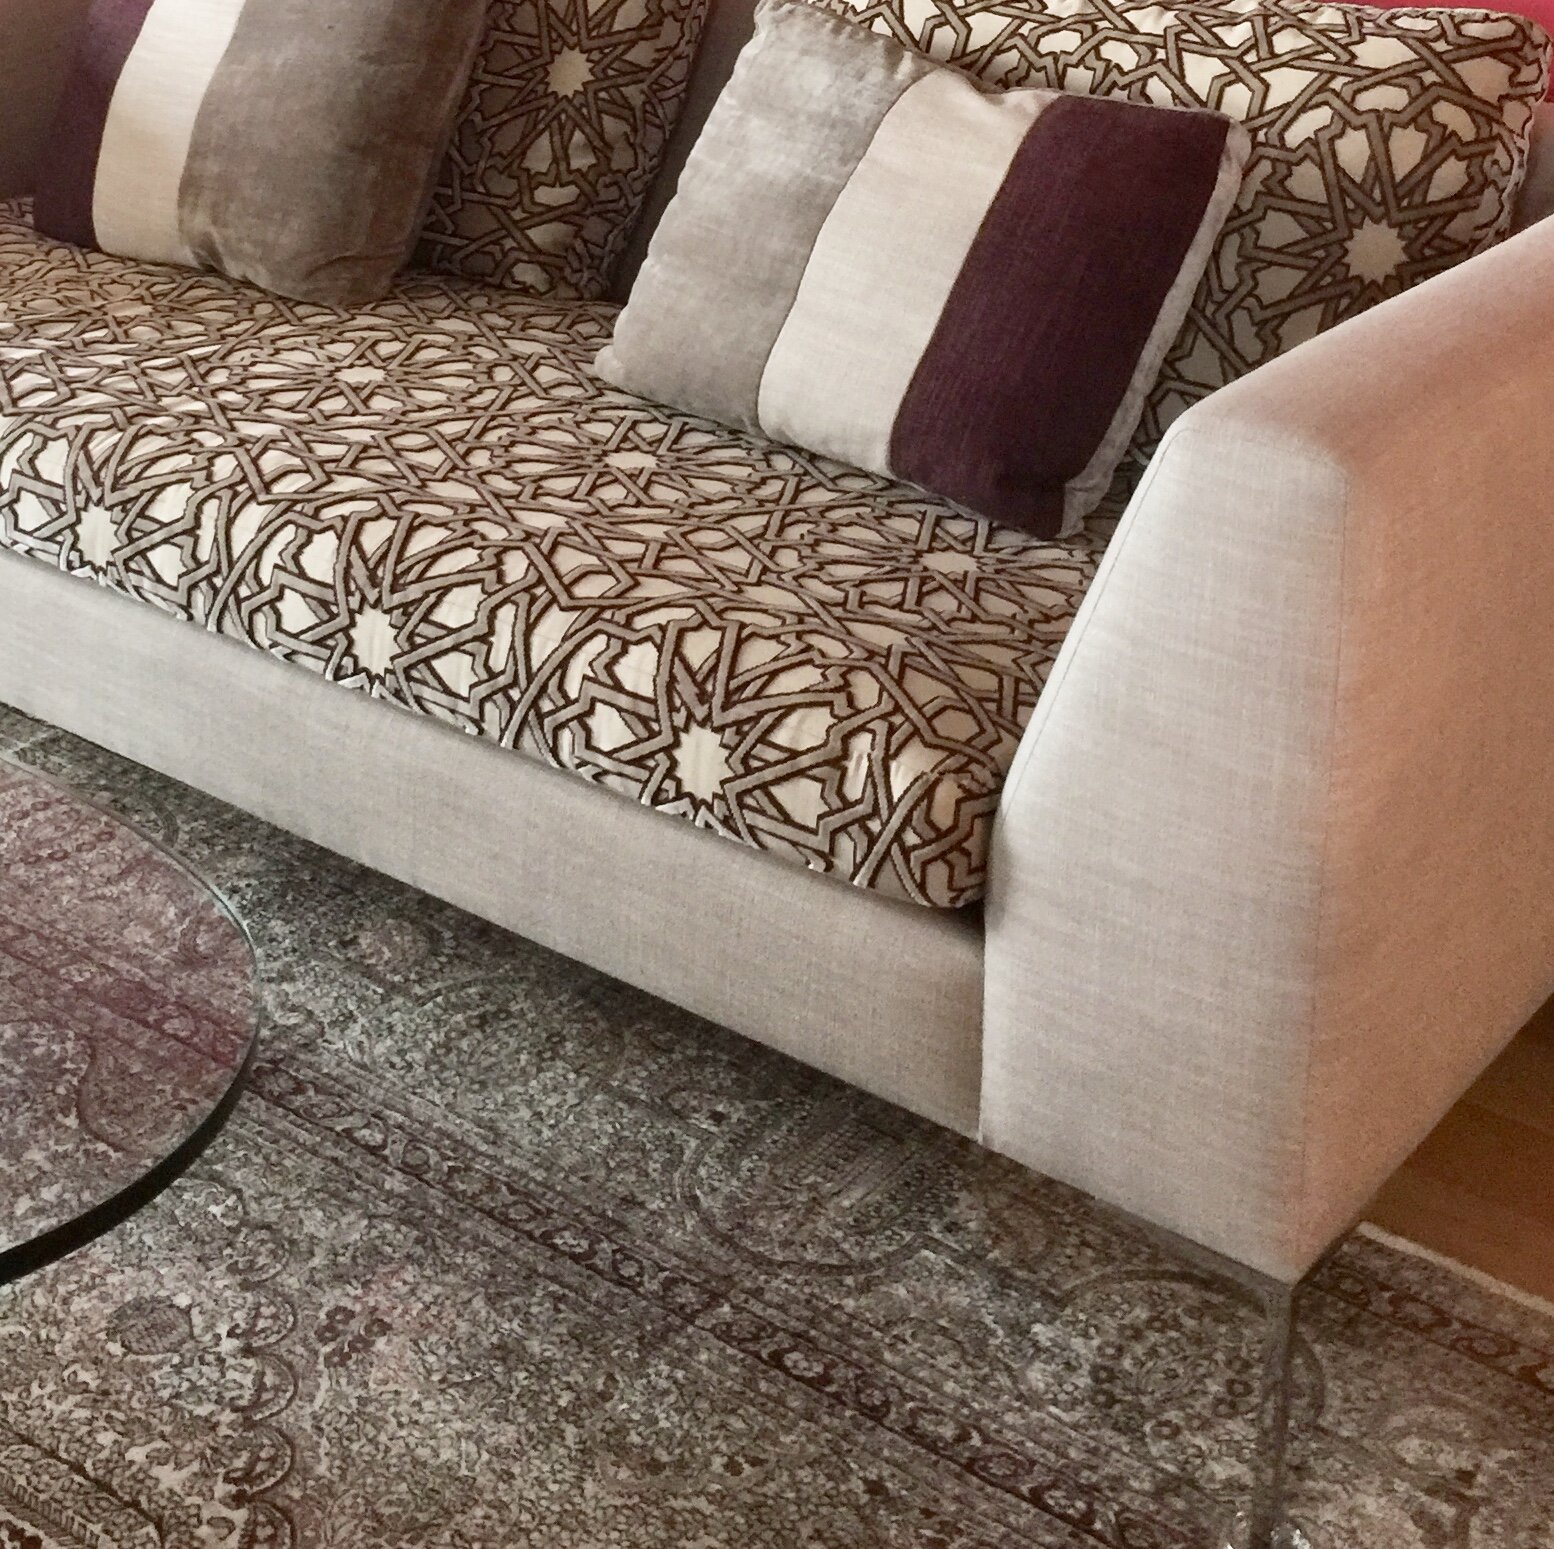  Custom sofa with fabrics that tie in existing pieces. 